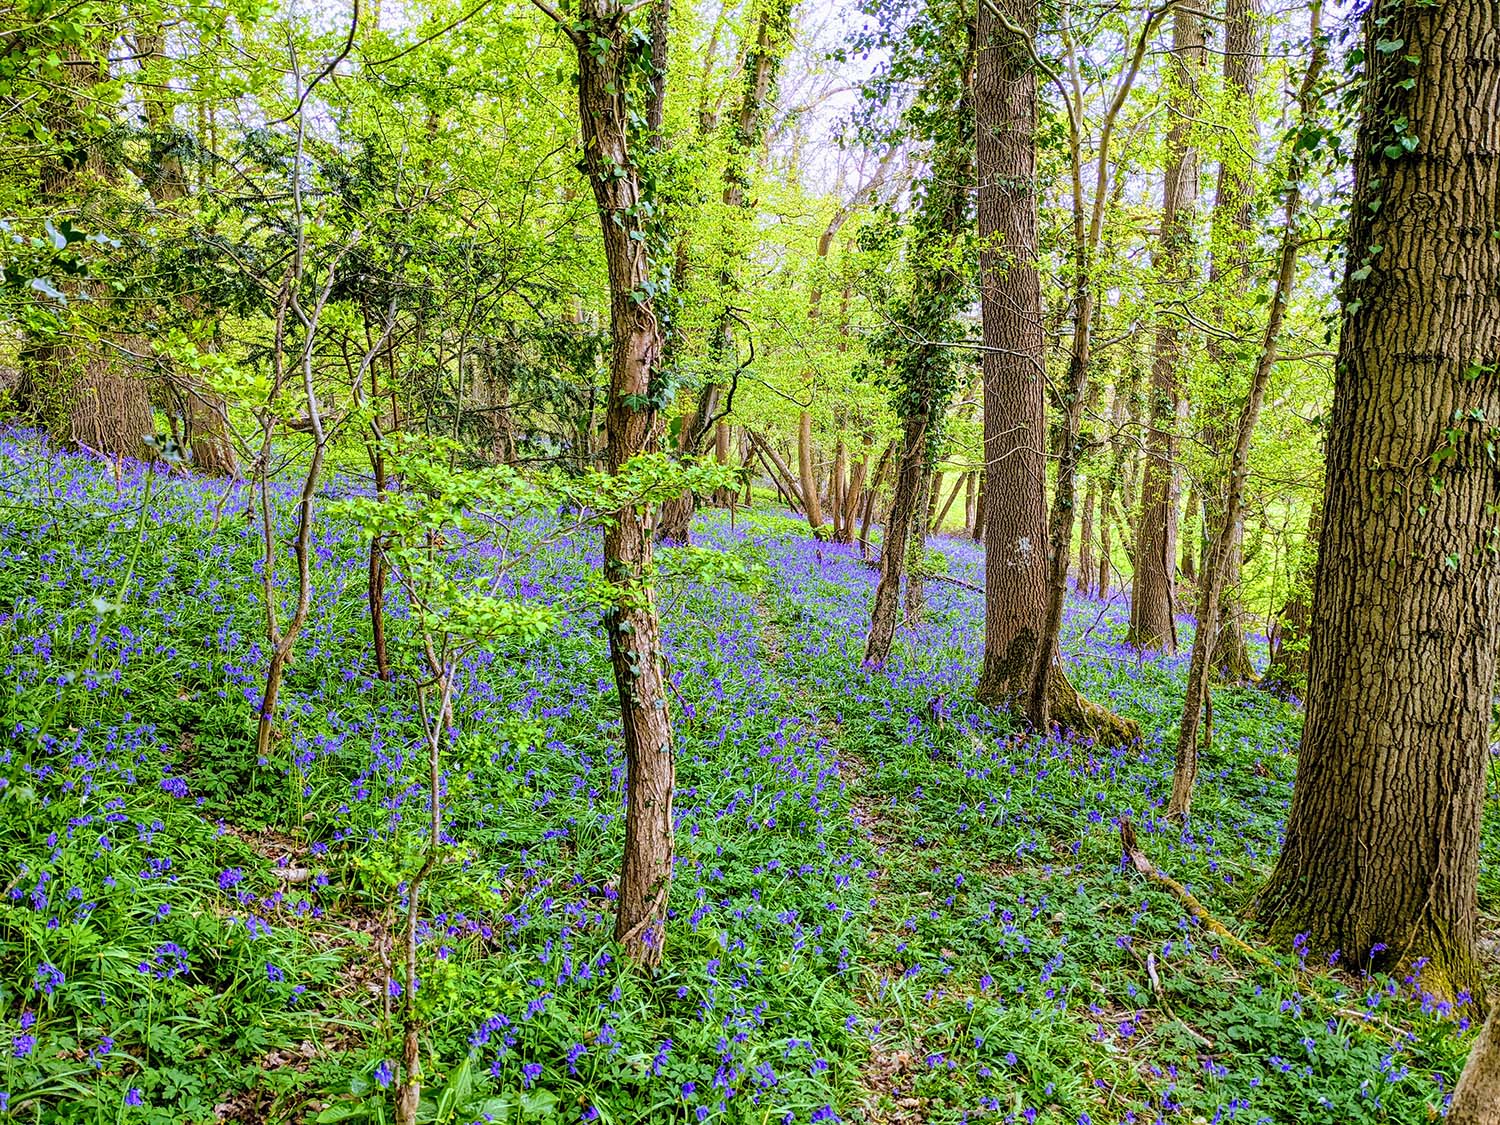 Photo of Bluebell Woods in Sussex